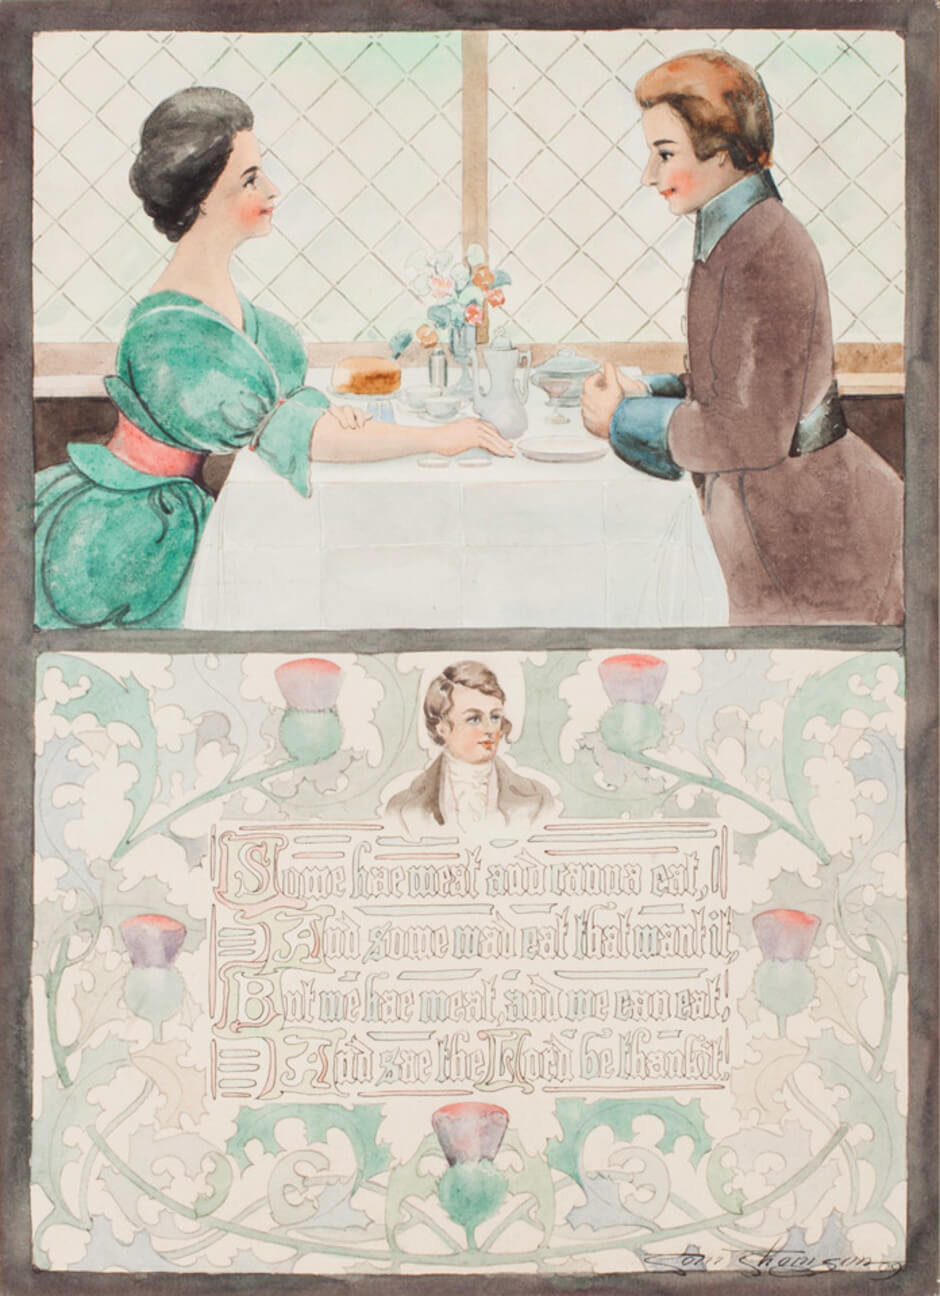 Art Canada Institute, Tom Thomson, Decorative Illustration: A Blessing by Robert Burns, 1909